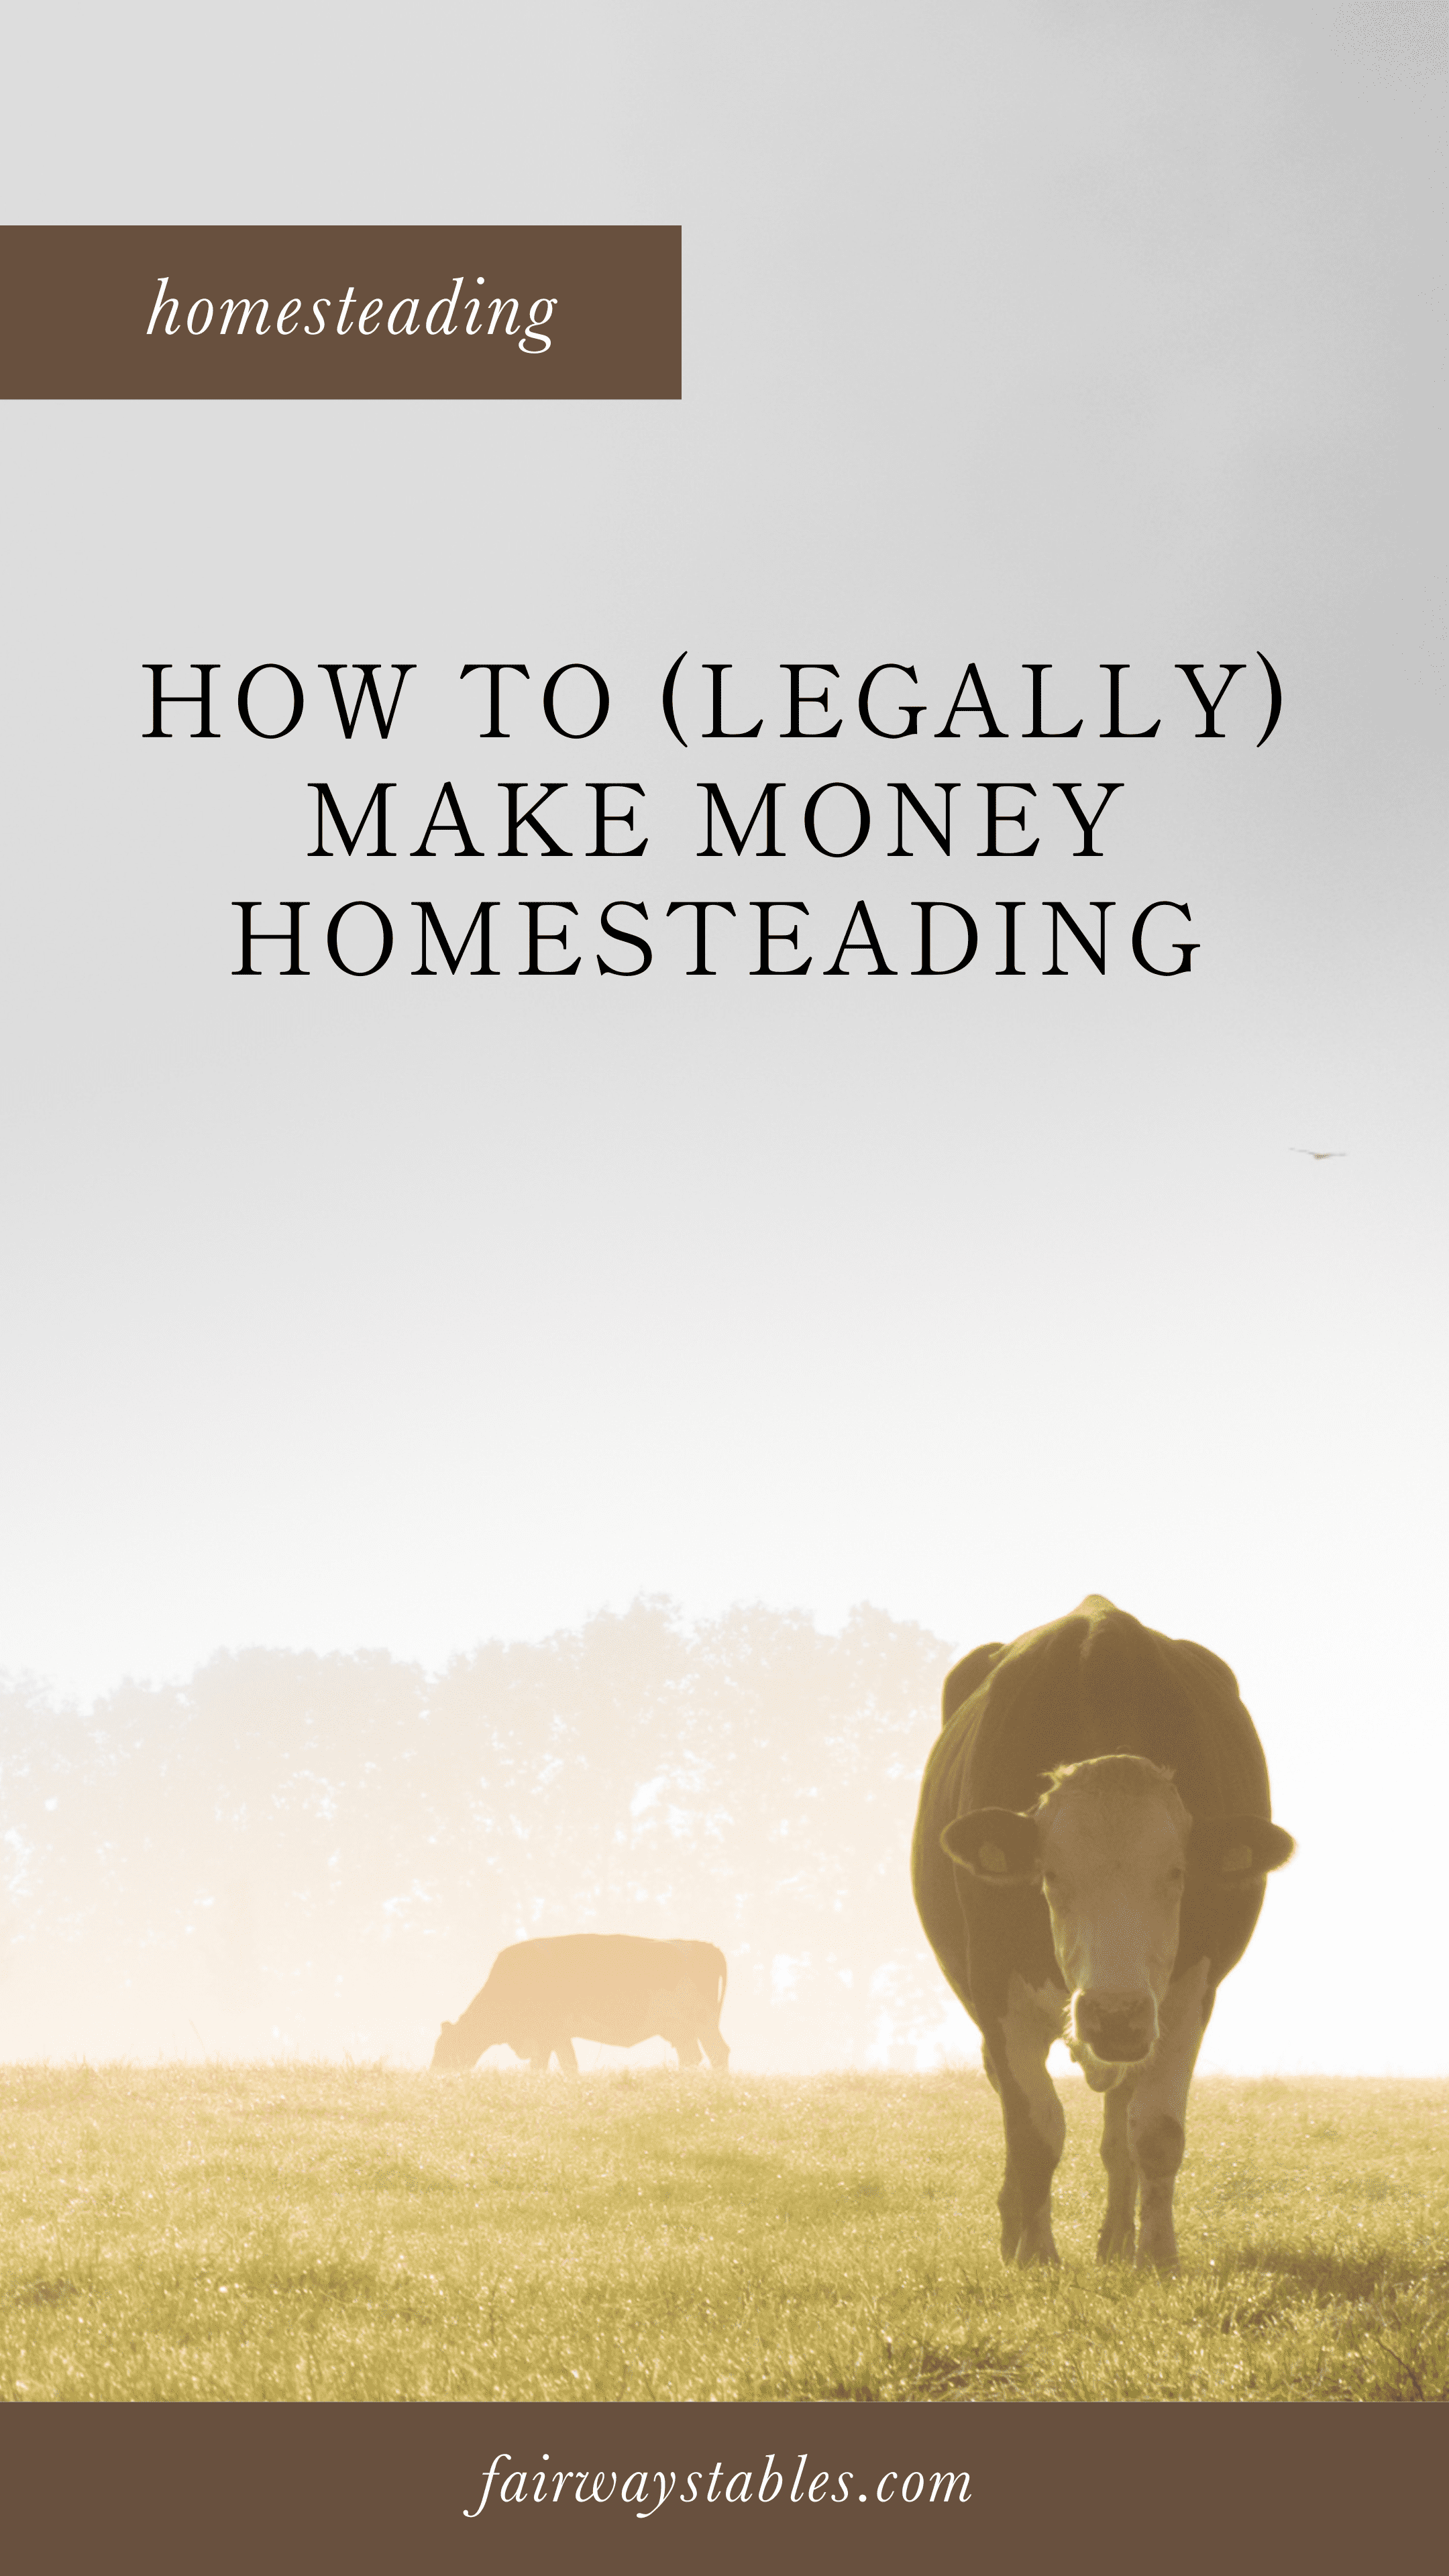 How To Legally Make Money Homesteading